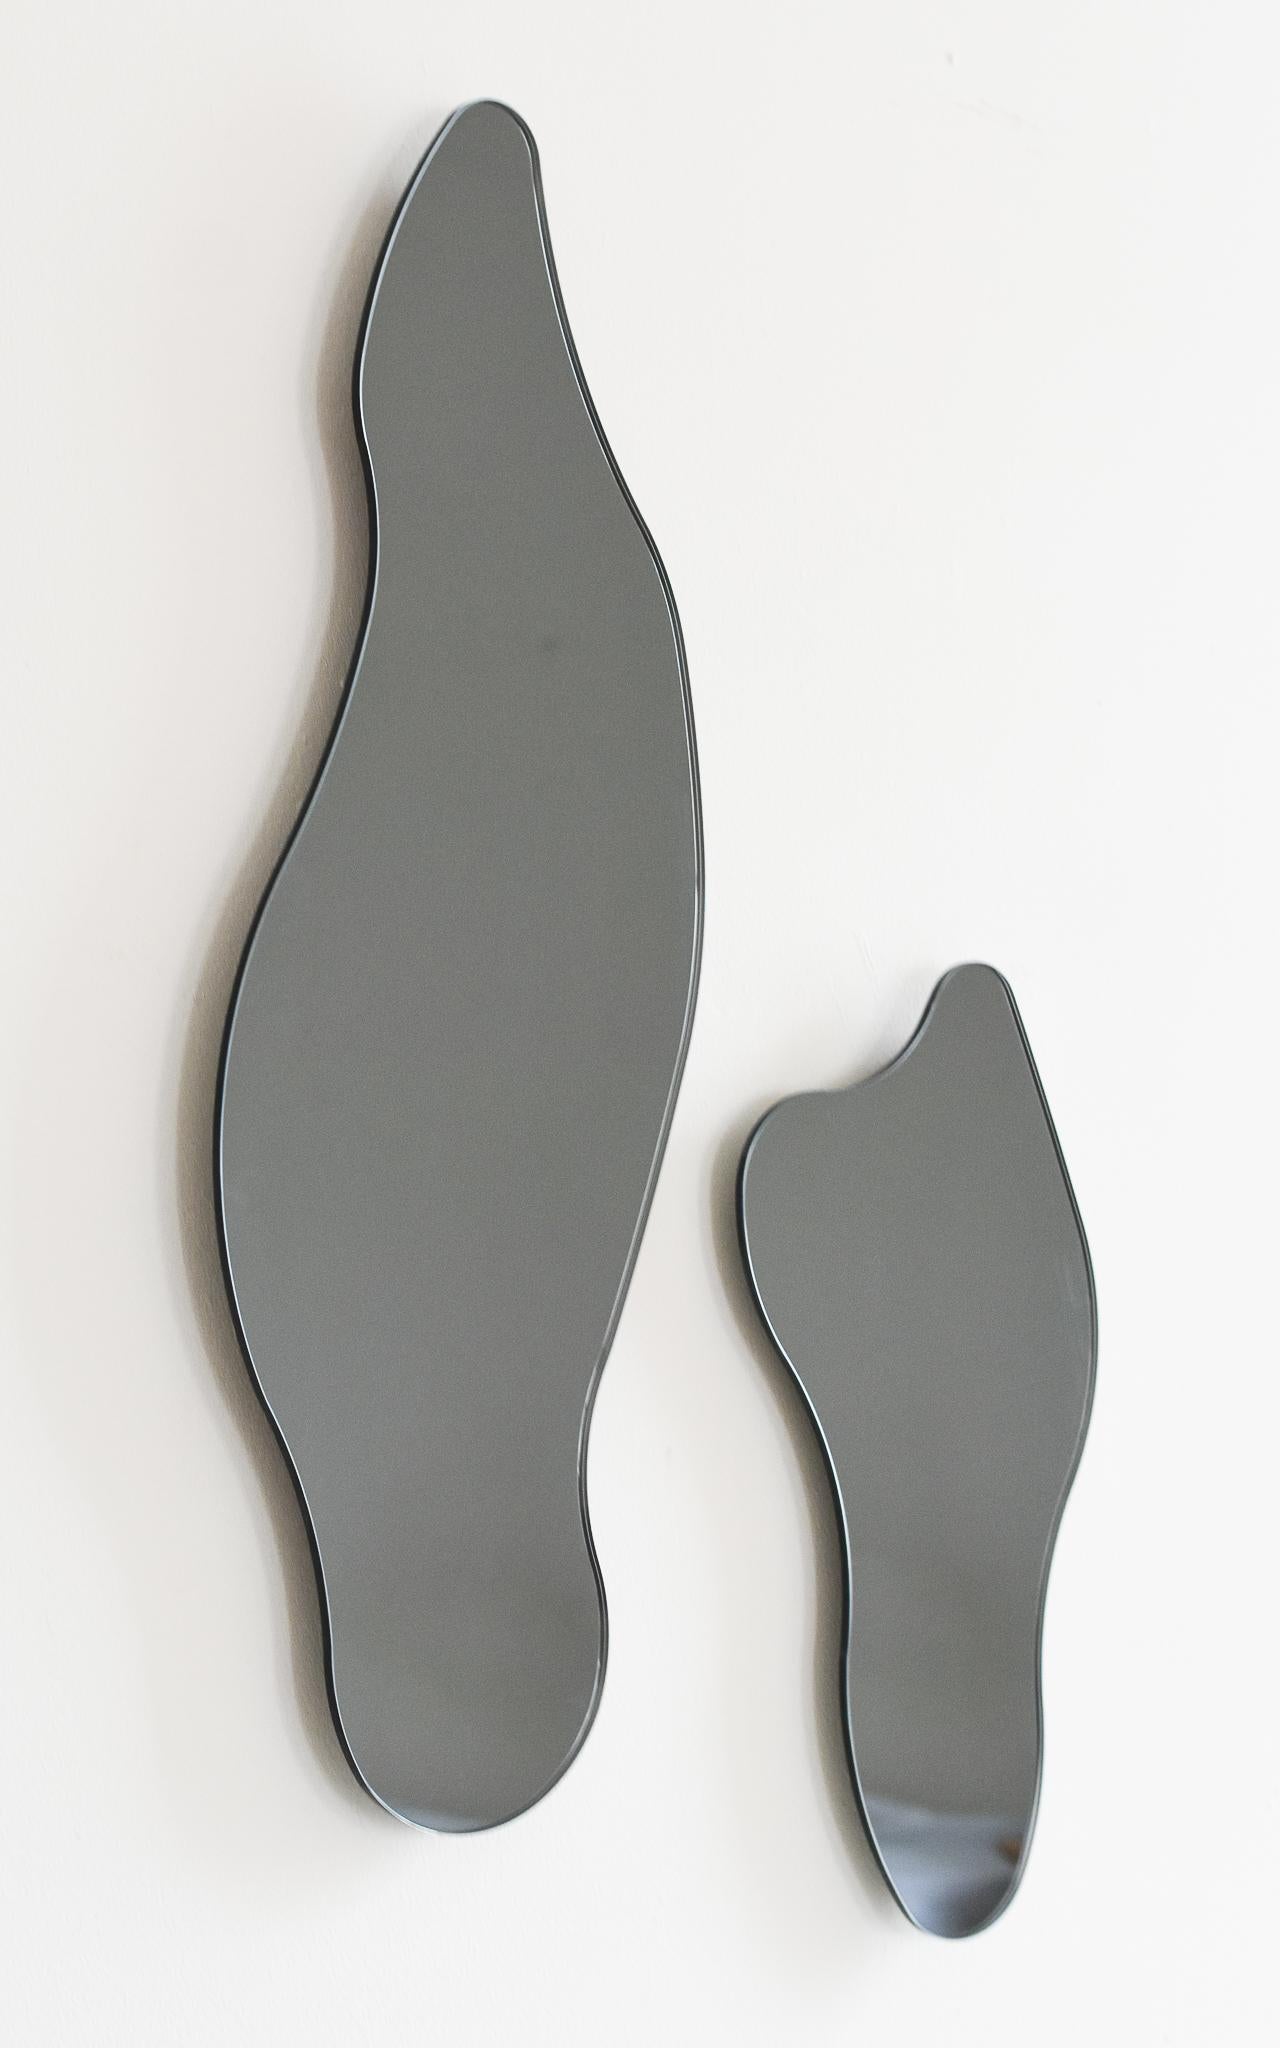 ISLA MIRRORS - Composition No. 2
Materials: Smoke Grey Glass, Black MDF
Dimensions: 20”W X 1”D X 28”H

Minimalist, elegant, amorphically shaped floating glass mirrors inspired by the topography of the Philippine archipelago. The ISLA Mirrors are